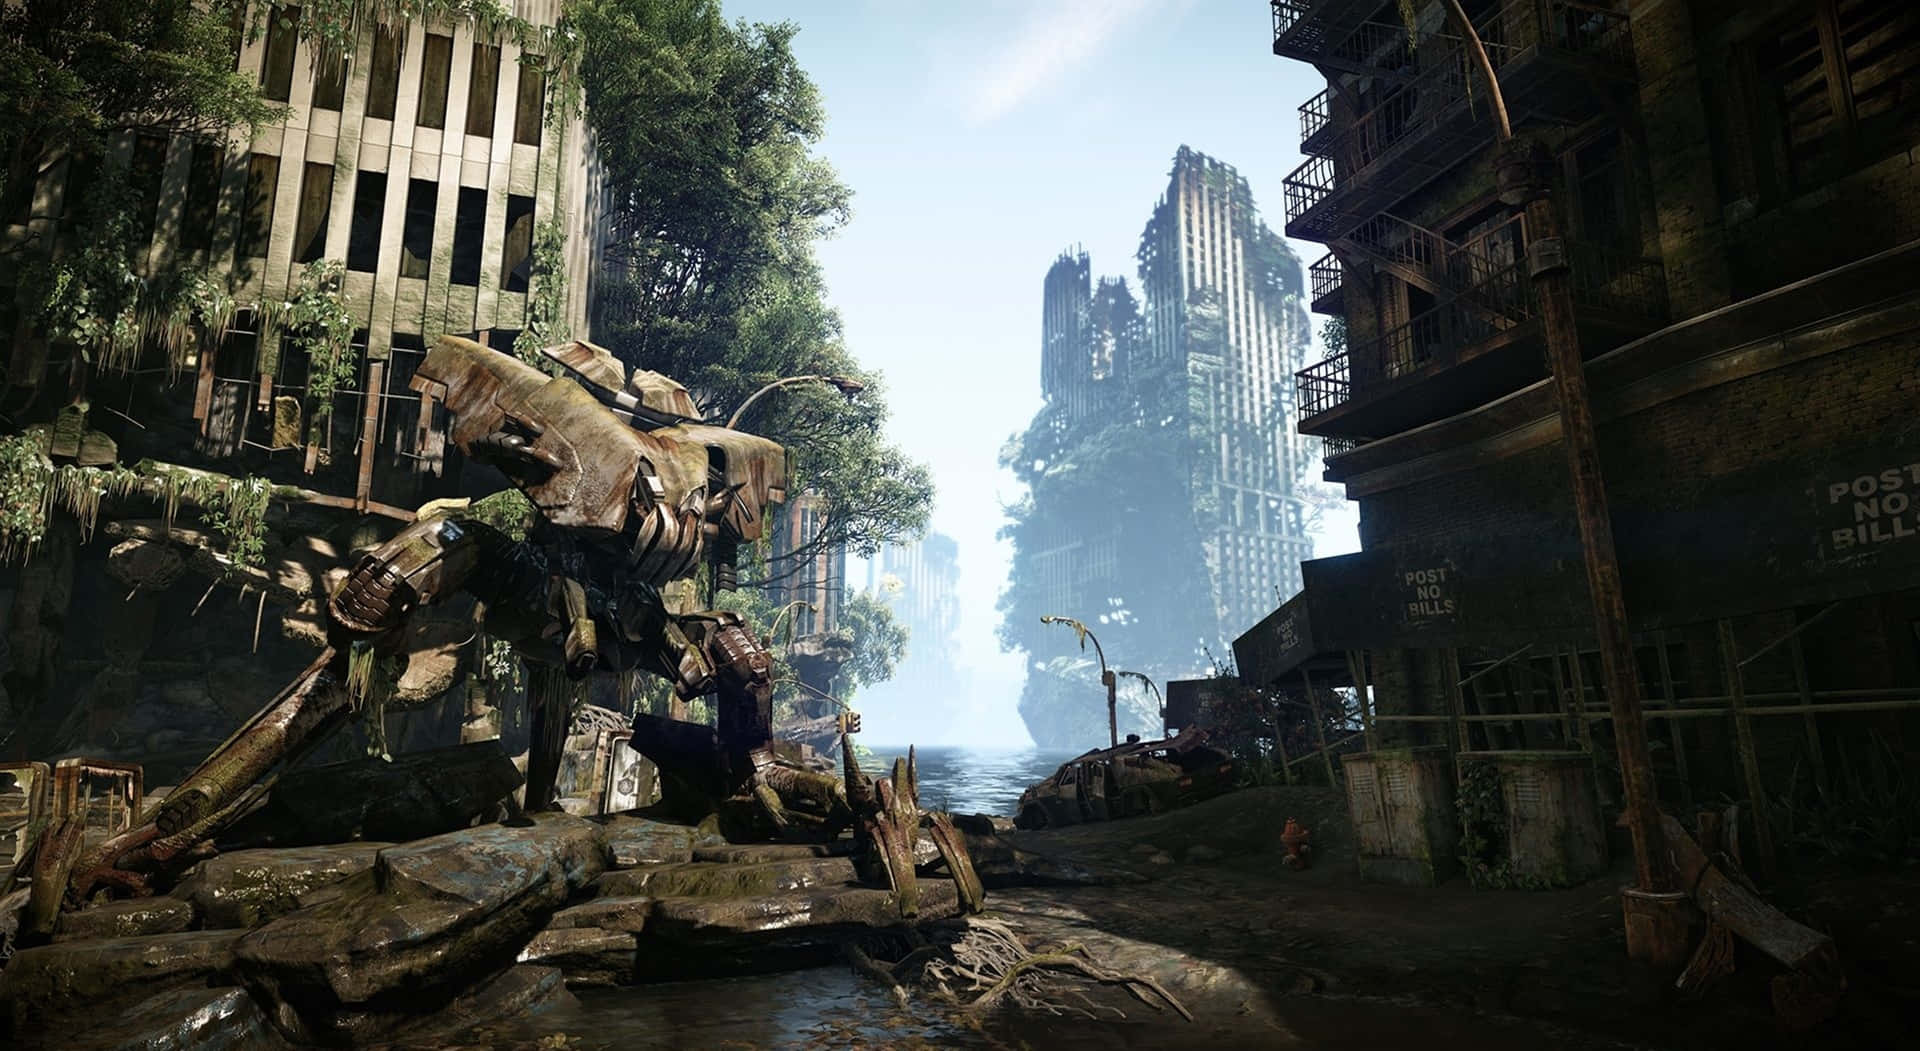 Blast Your Way Through A Ruined City In Crysis Background